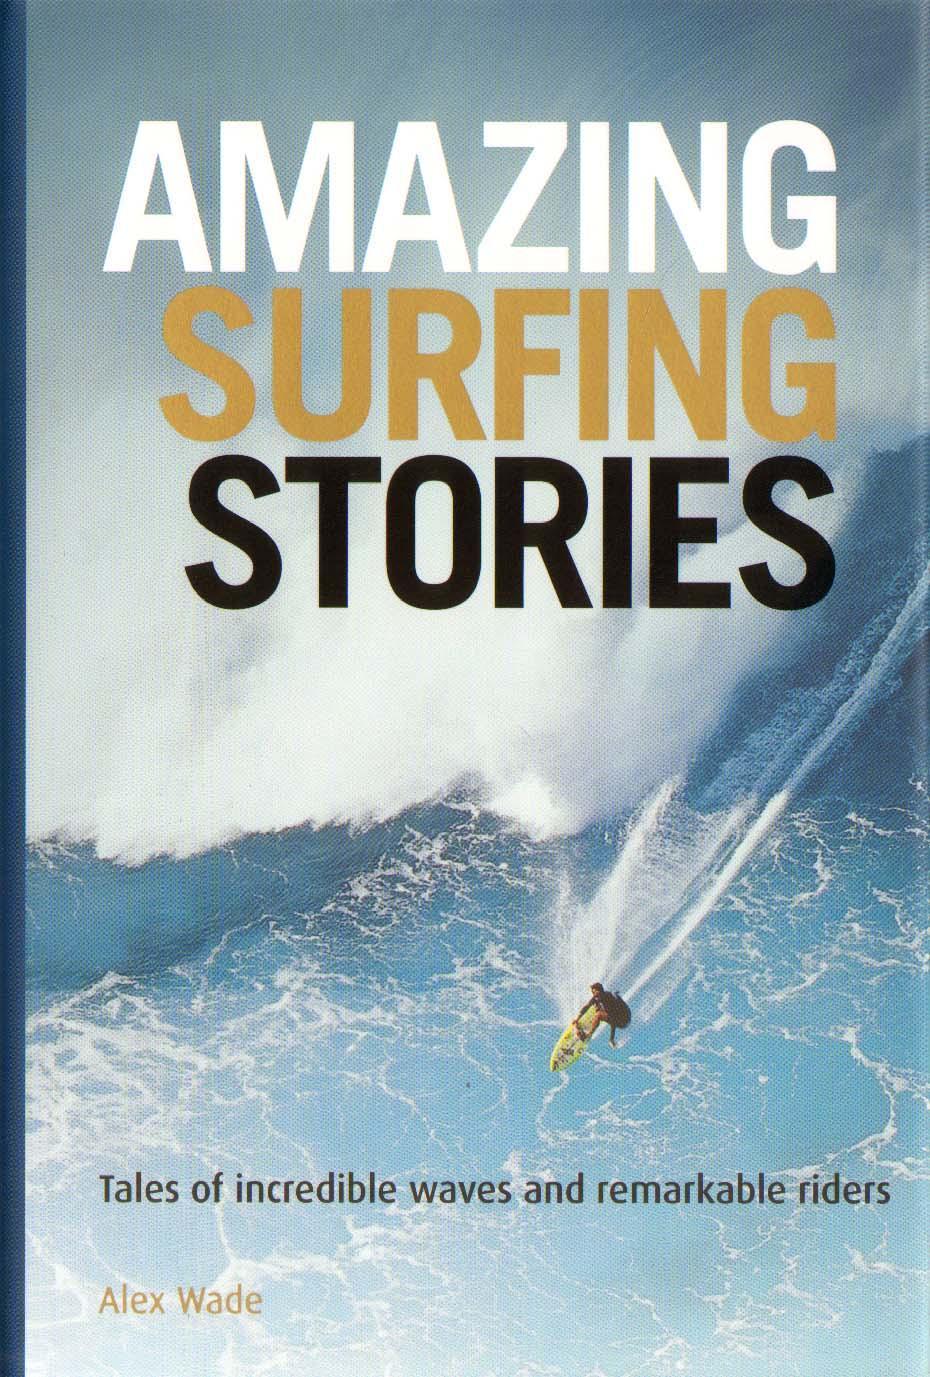 Amazing Surfing Stories - Tales of Incredible Waves and Rema